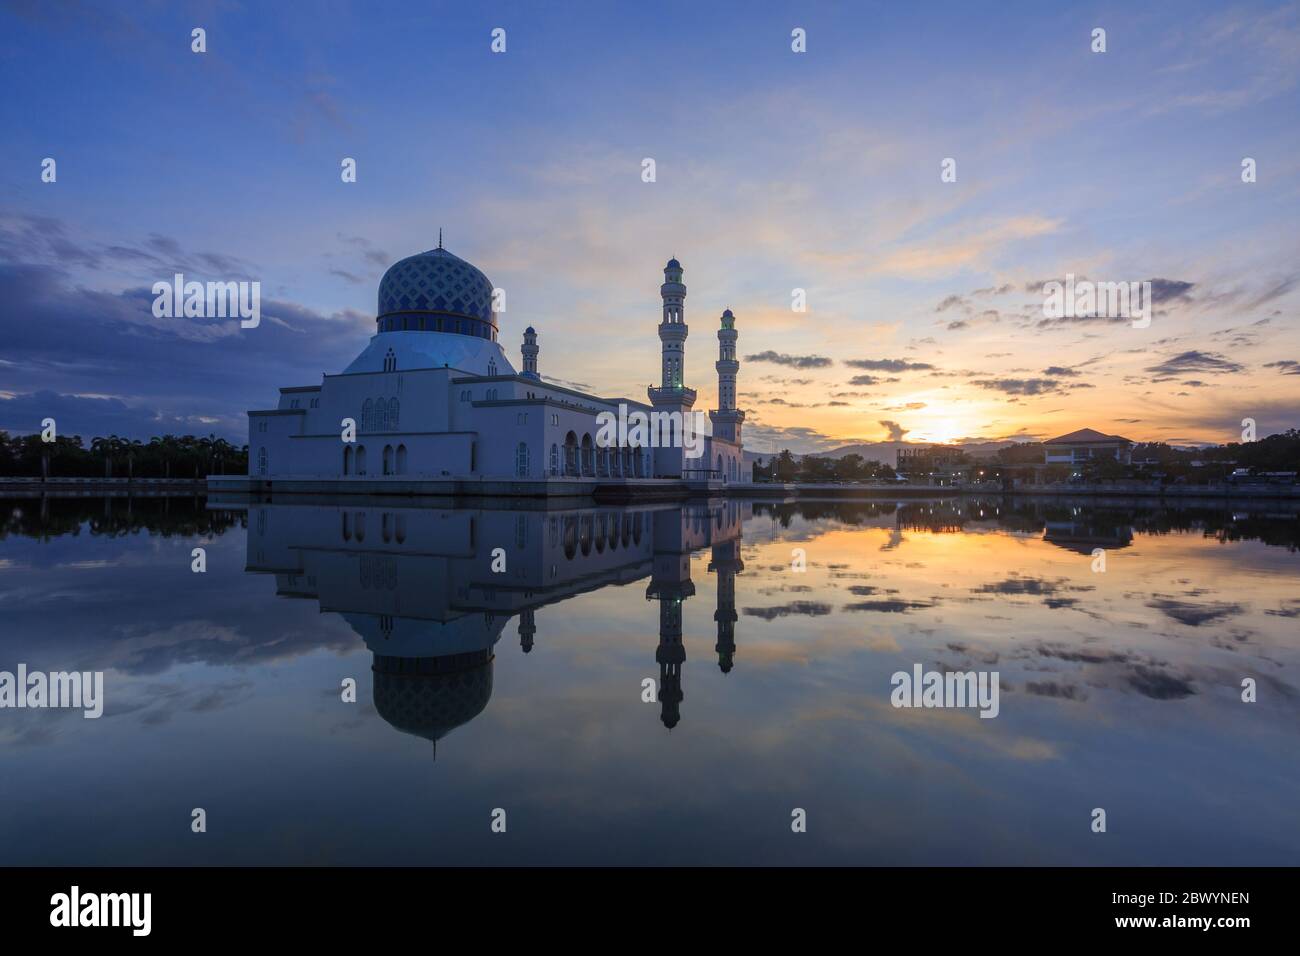 Majestic Beautiful sunrise blue hour and reflection of Floating Mosque Of Kota Kinabalu, Sabah. A mosque is a place of worship for followers of Islam. Stock Photo